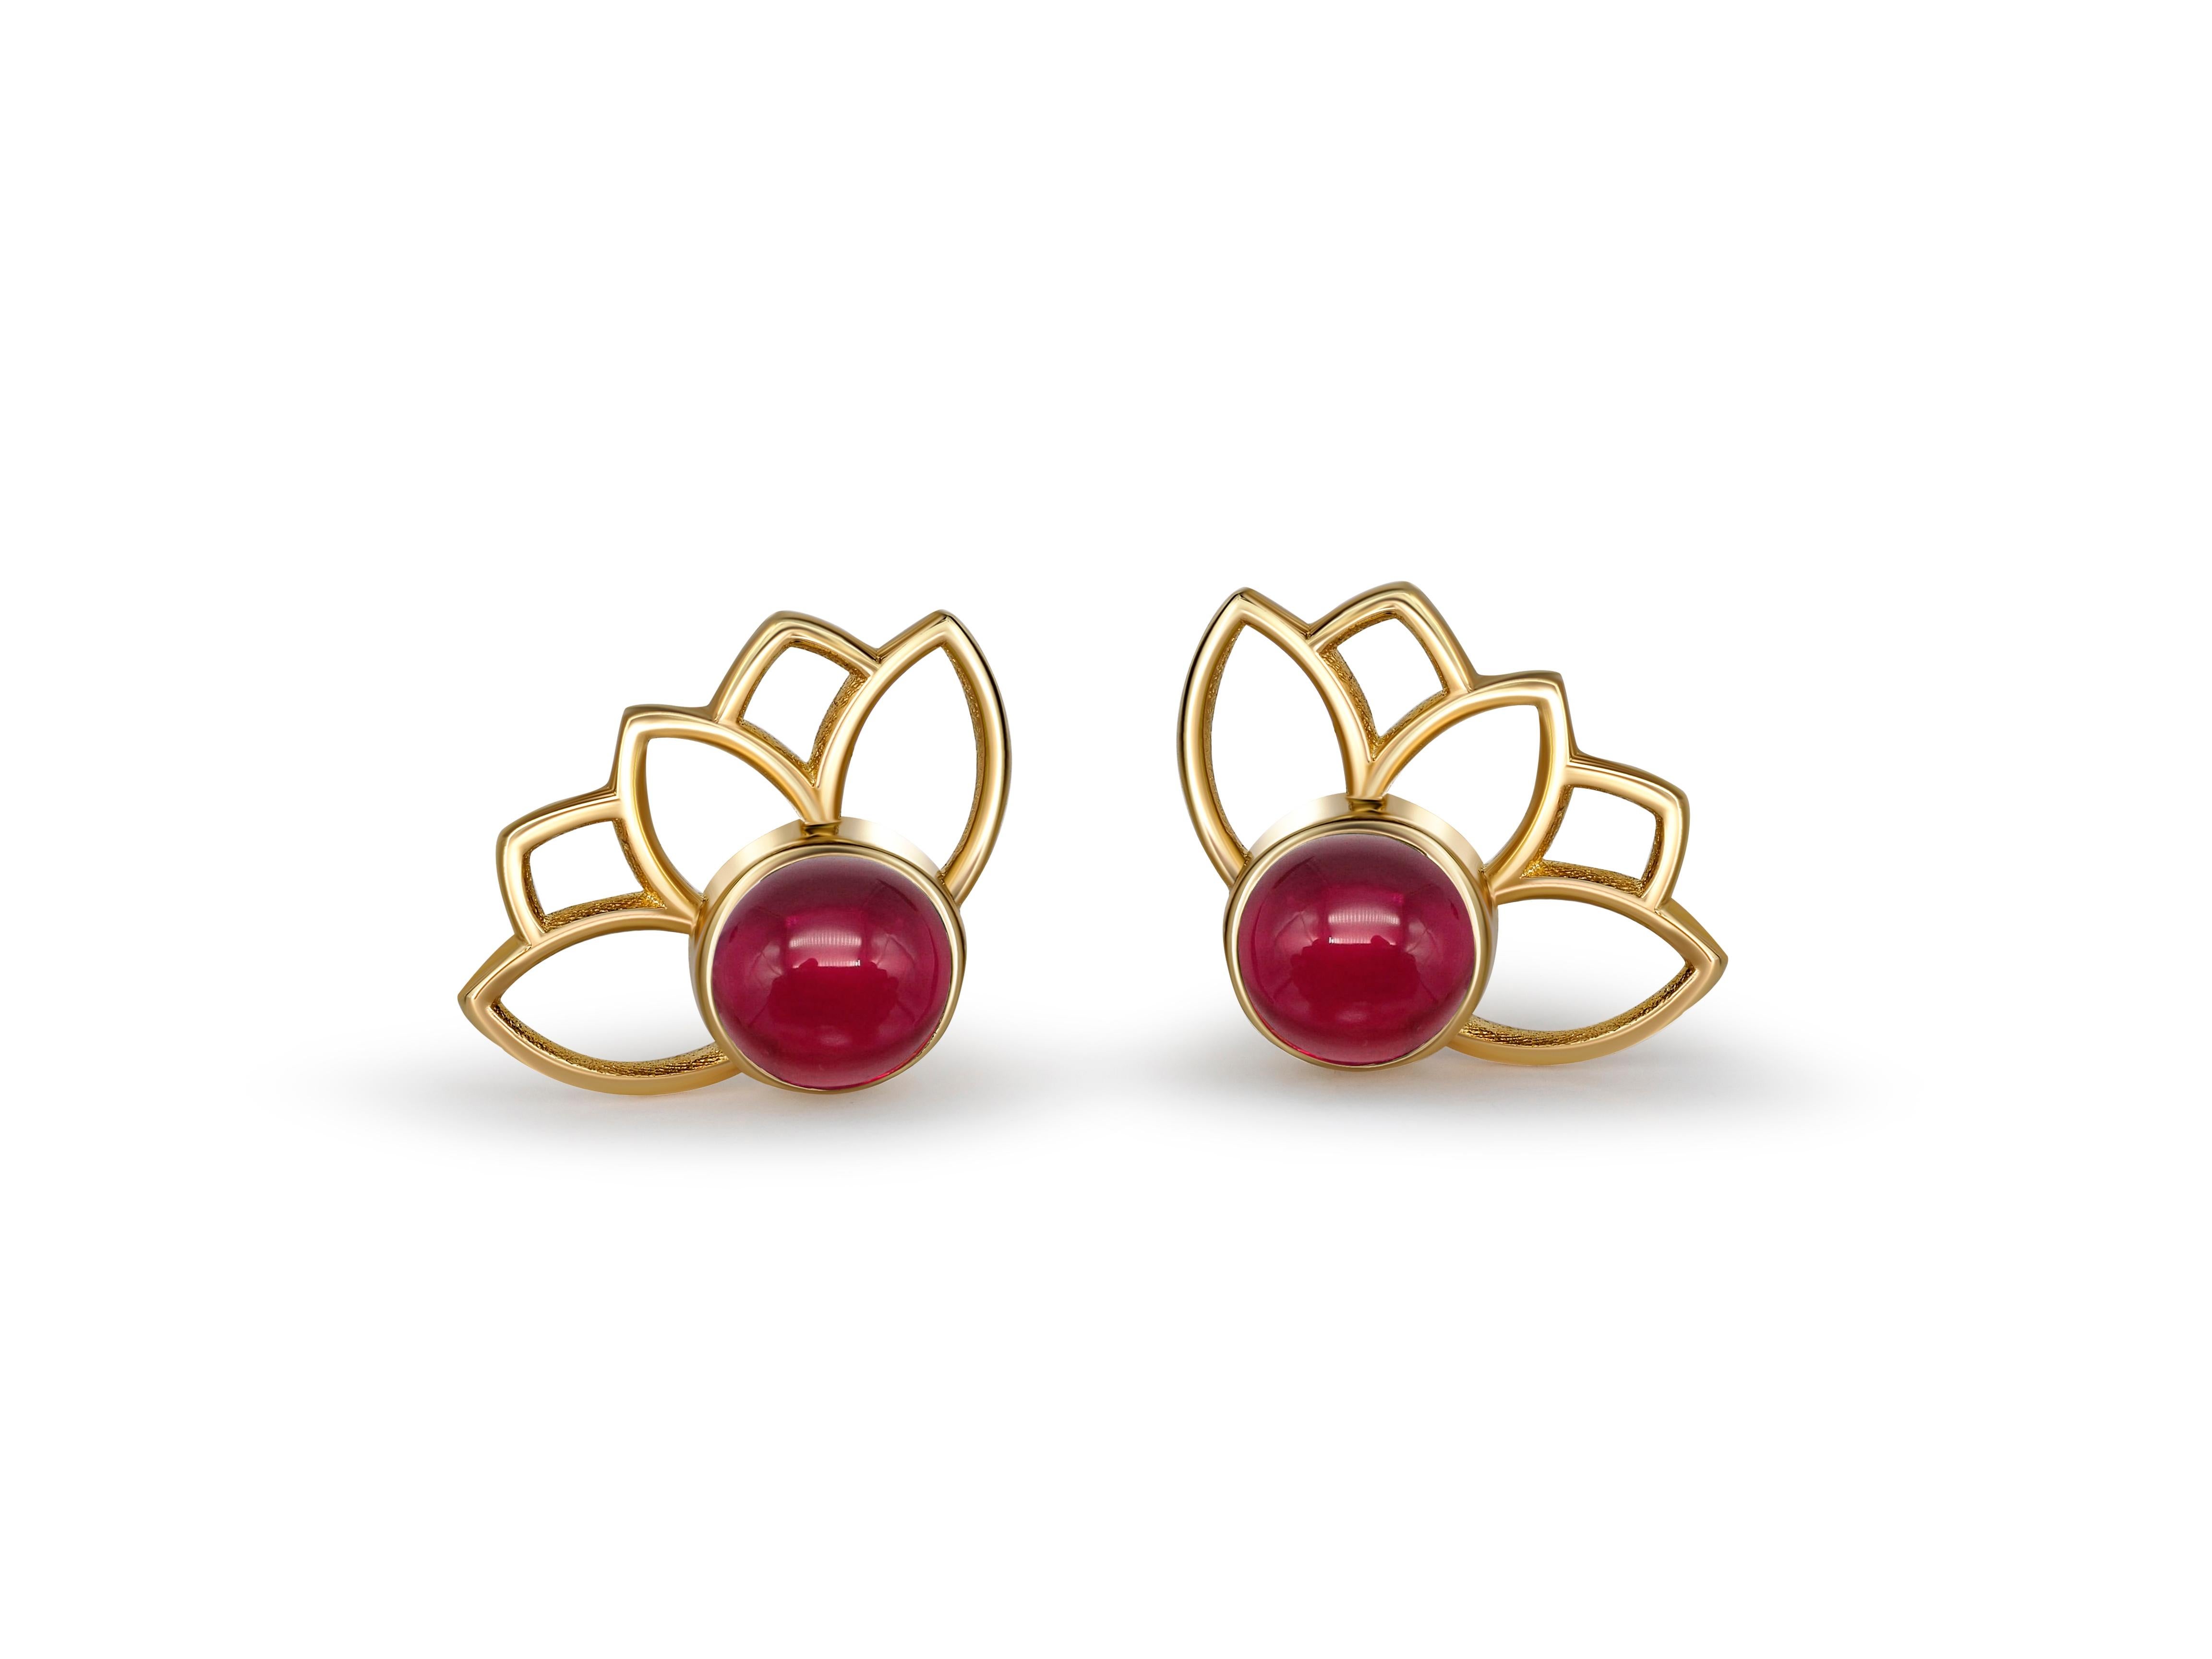 Lotus earrings studs with rubies in 14k gold. 

Ruby cabochon earrings. Ruby Gold Earrings. Flower gold earrings. Delicate ruby earrings.

Metal: 14 karat gold
Weight: 1.2 g.
Size: 11.45 x 8.35 mm.

Set with genuine  rubies: weight - 0.45 ct x 2 =